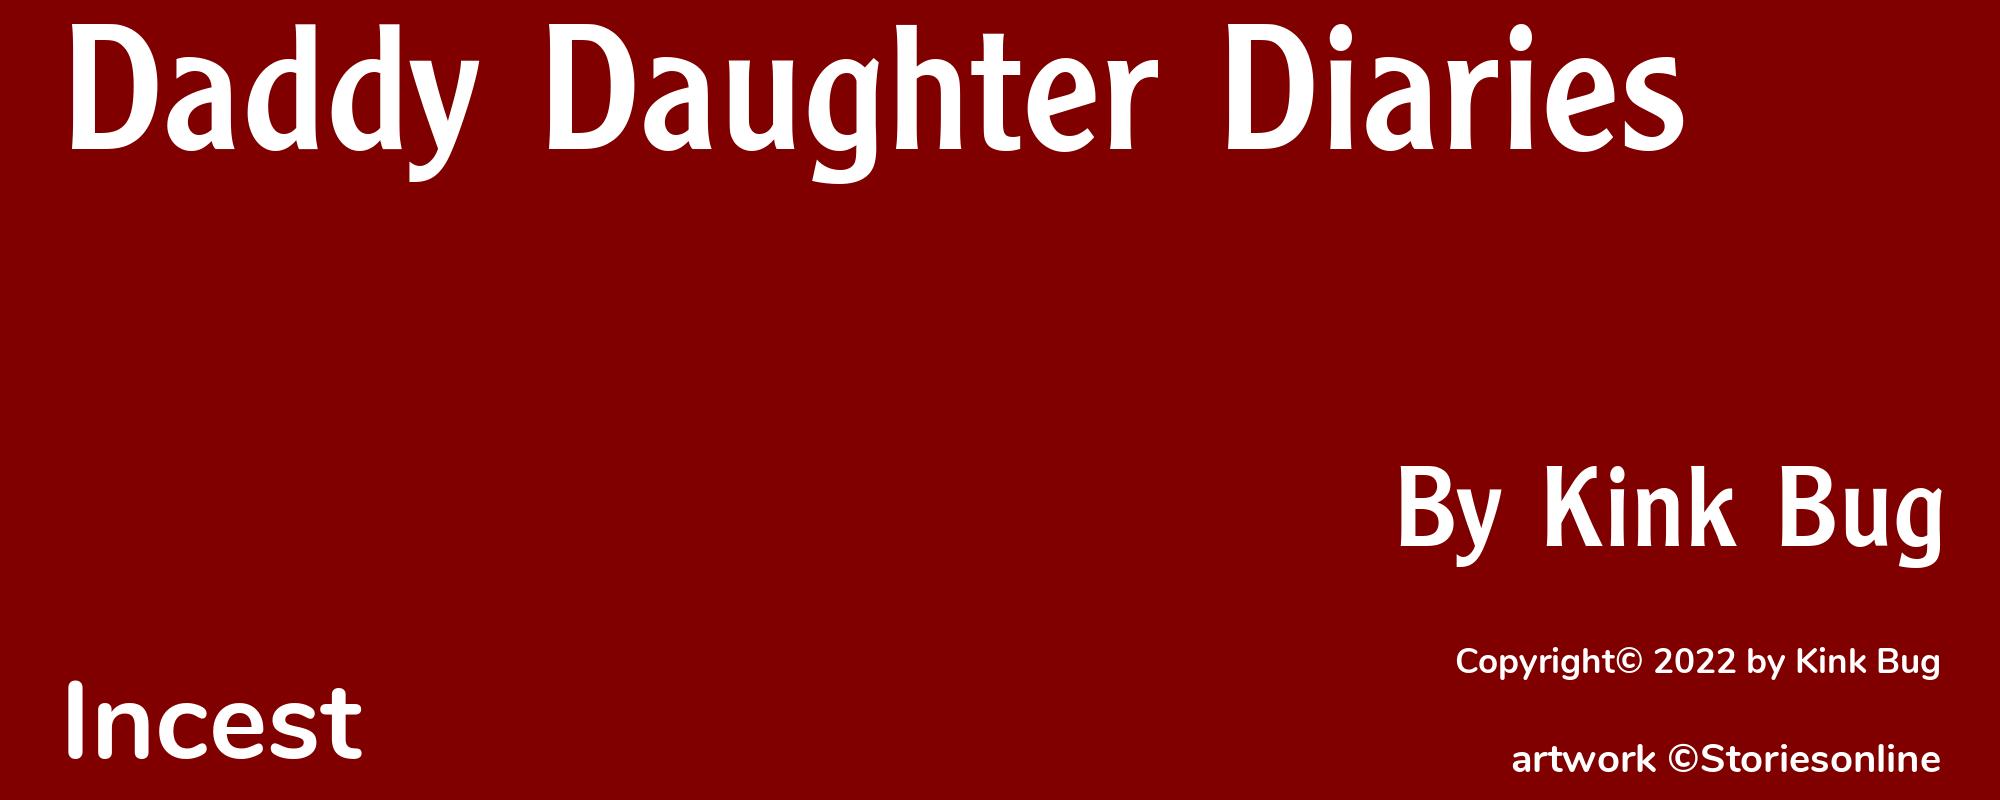 Daddy Daughter Diaries - Cover